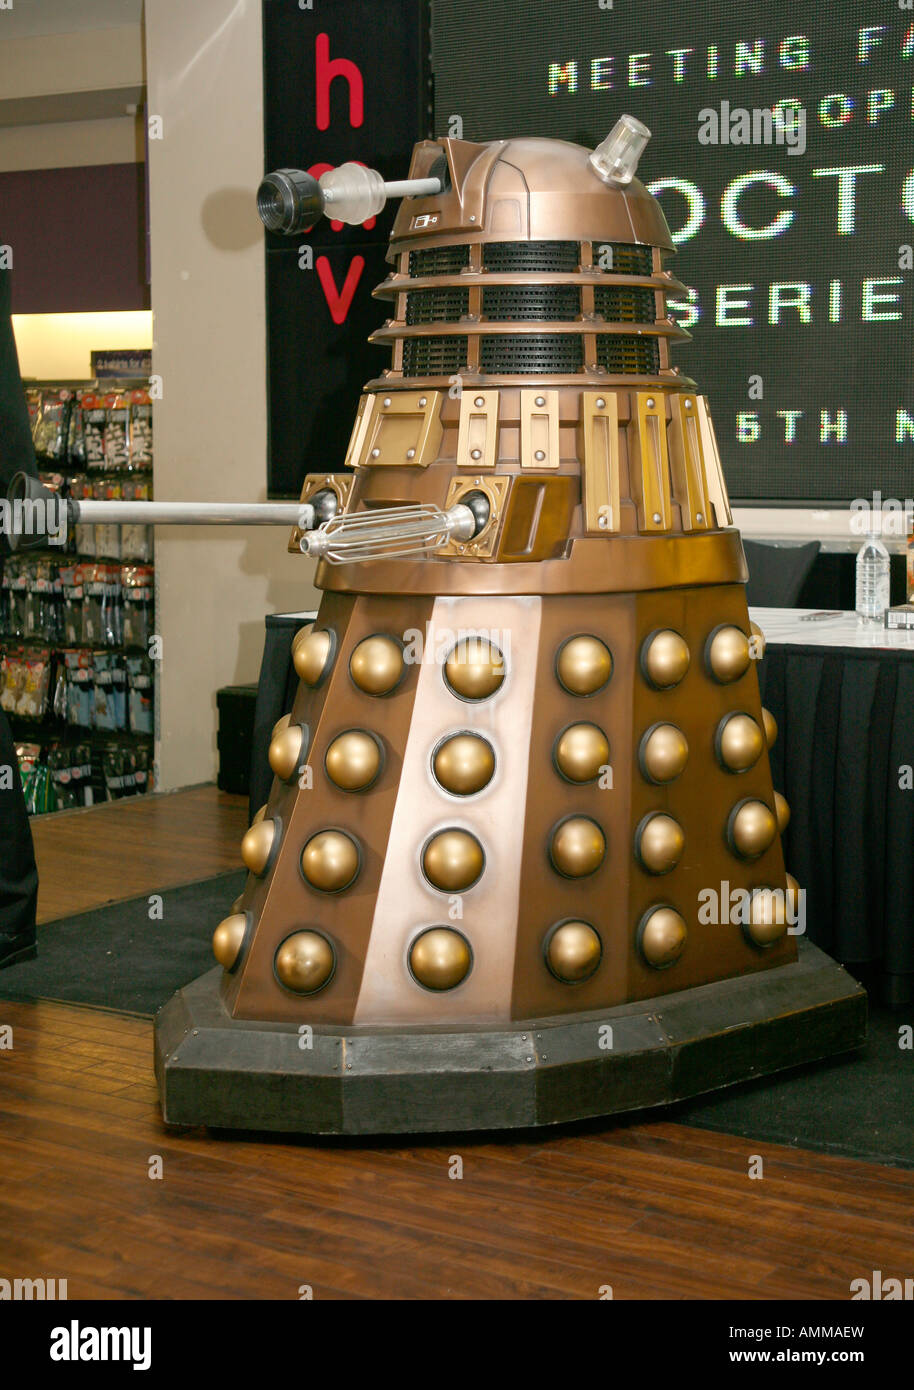 Dalek from the Doctor Who BBC TV series Stock Photo